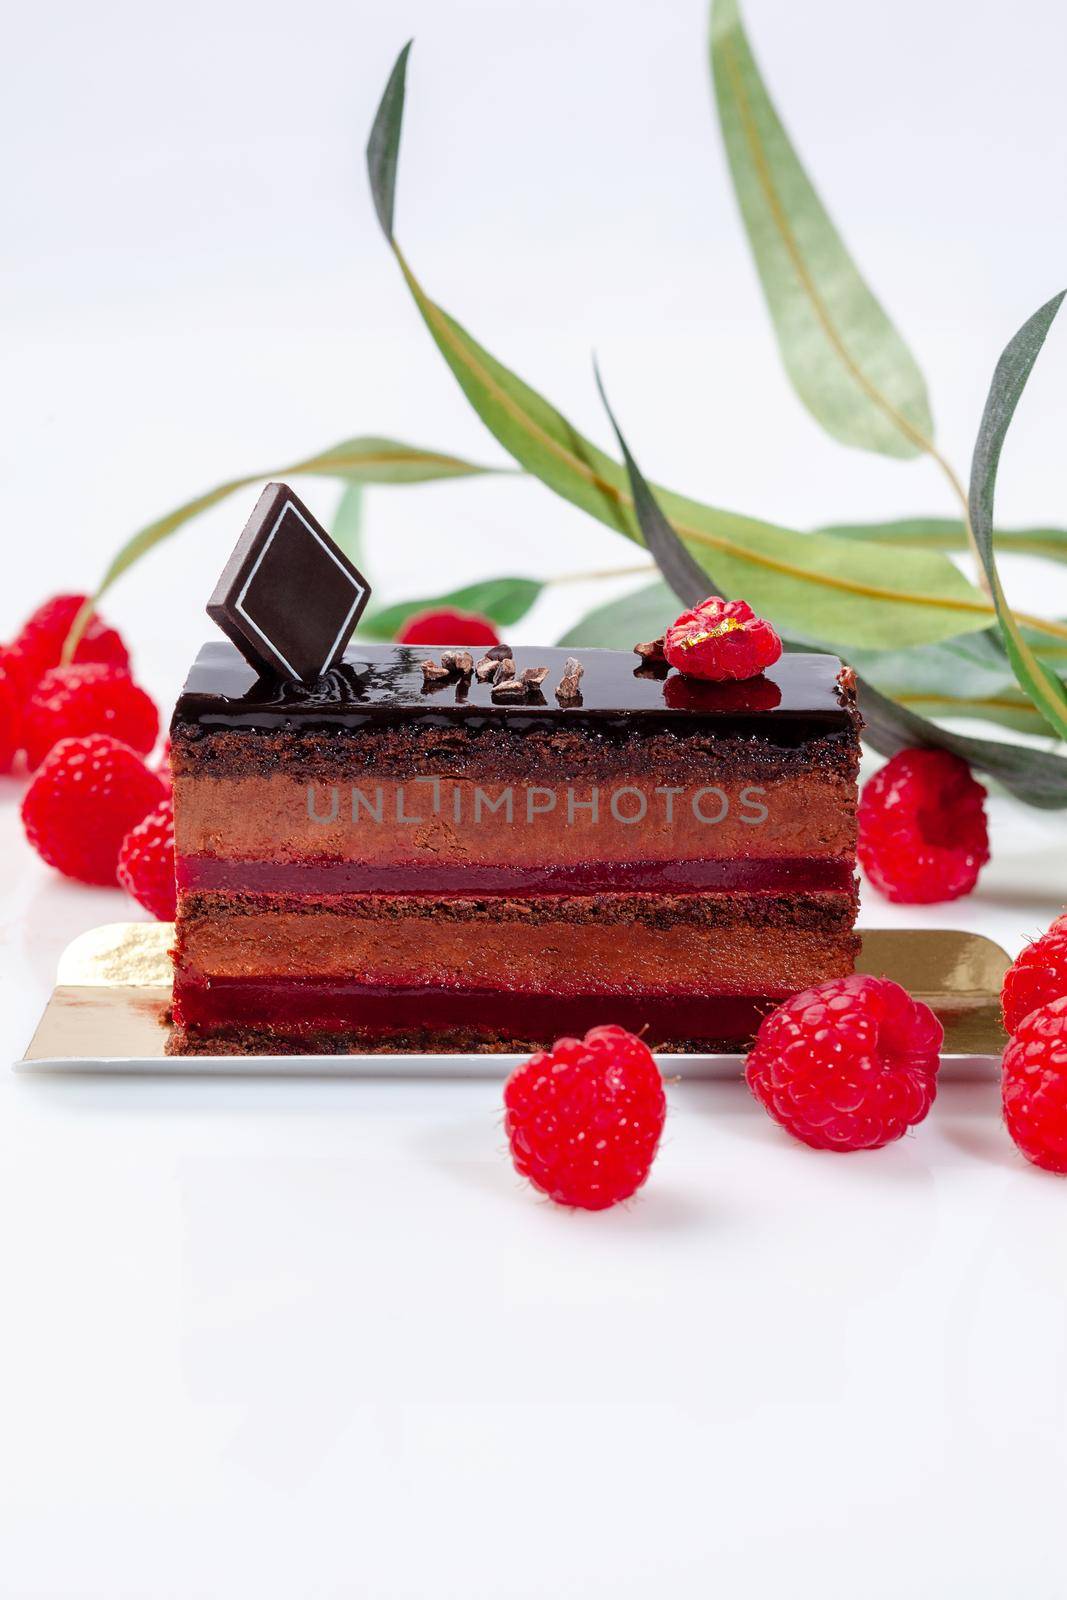 Chocolate sponge cake with airy mousse, raspberry confit and glaze garnished with fresh berries by nazarovsergey